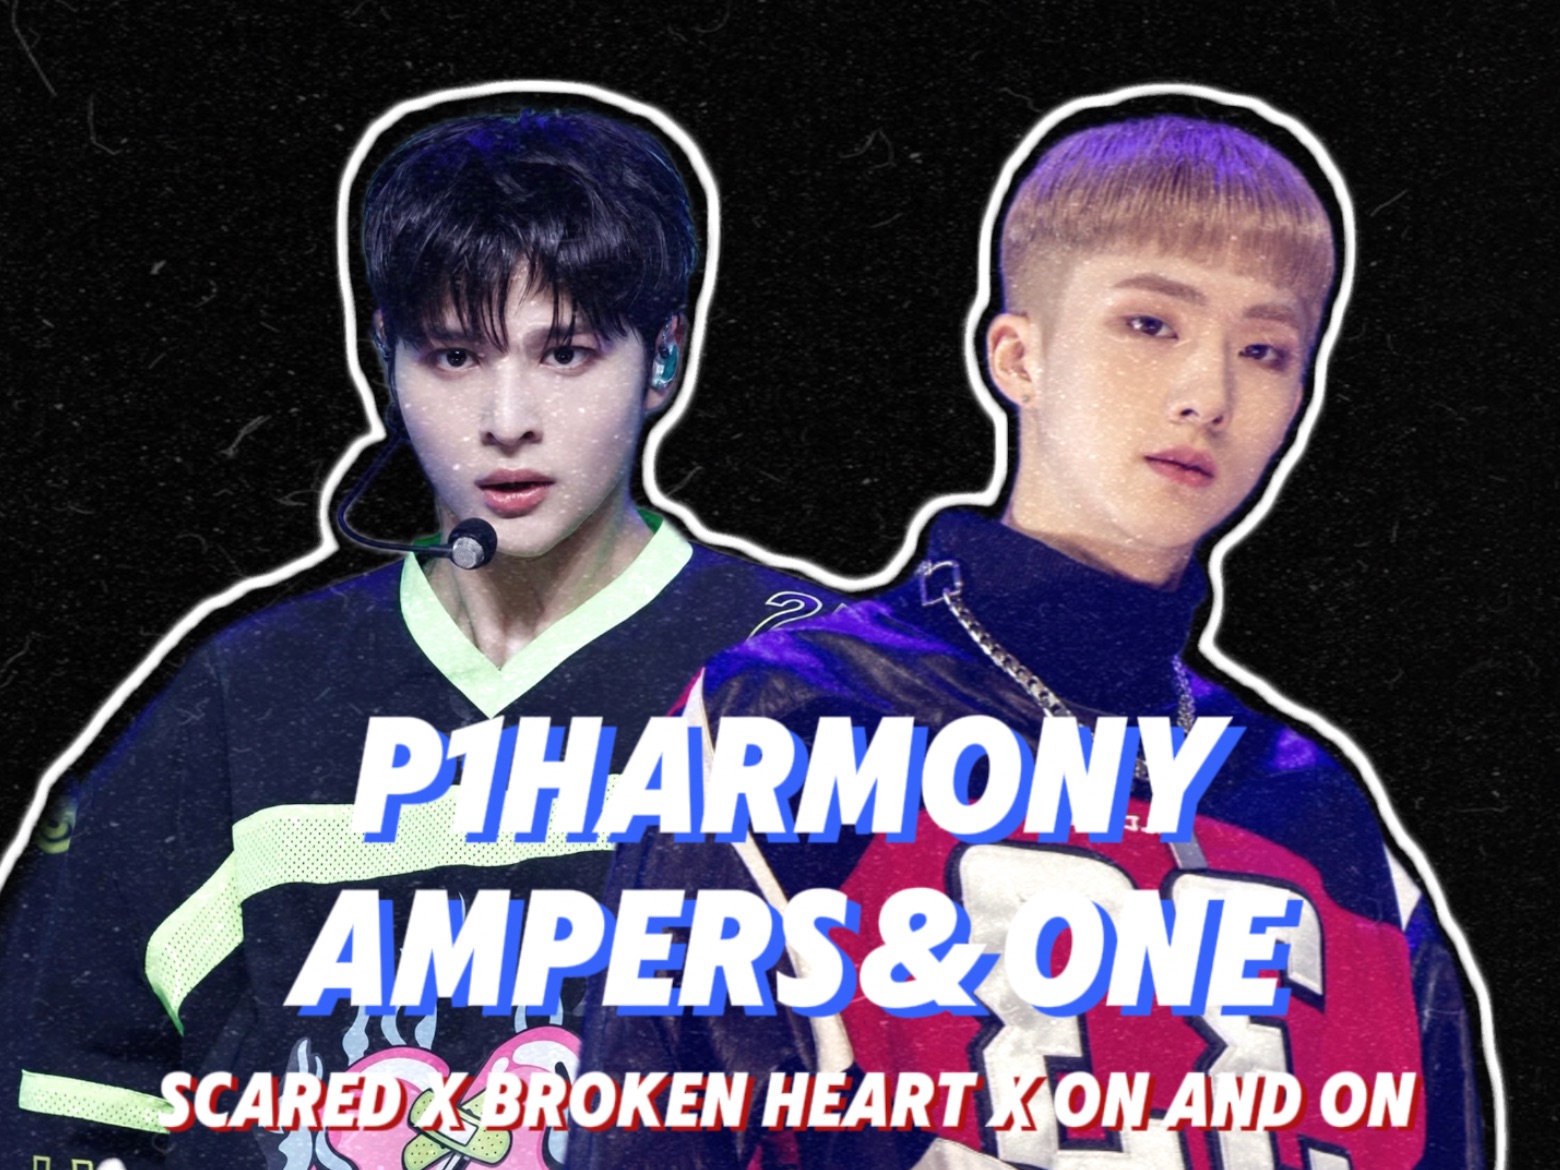 【K-POP】P1Harmony x AMPERS&ONE, Scared x Broken Heart x On and On Mashup混音